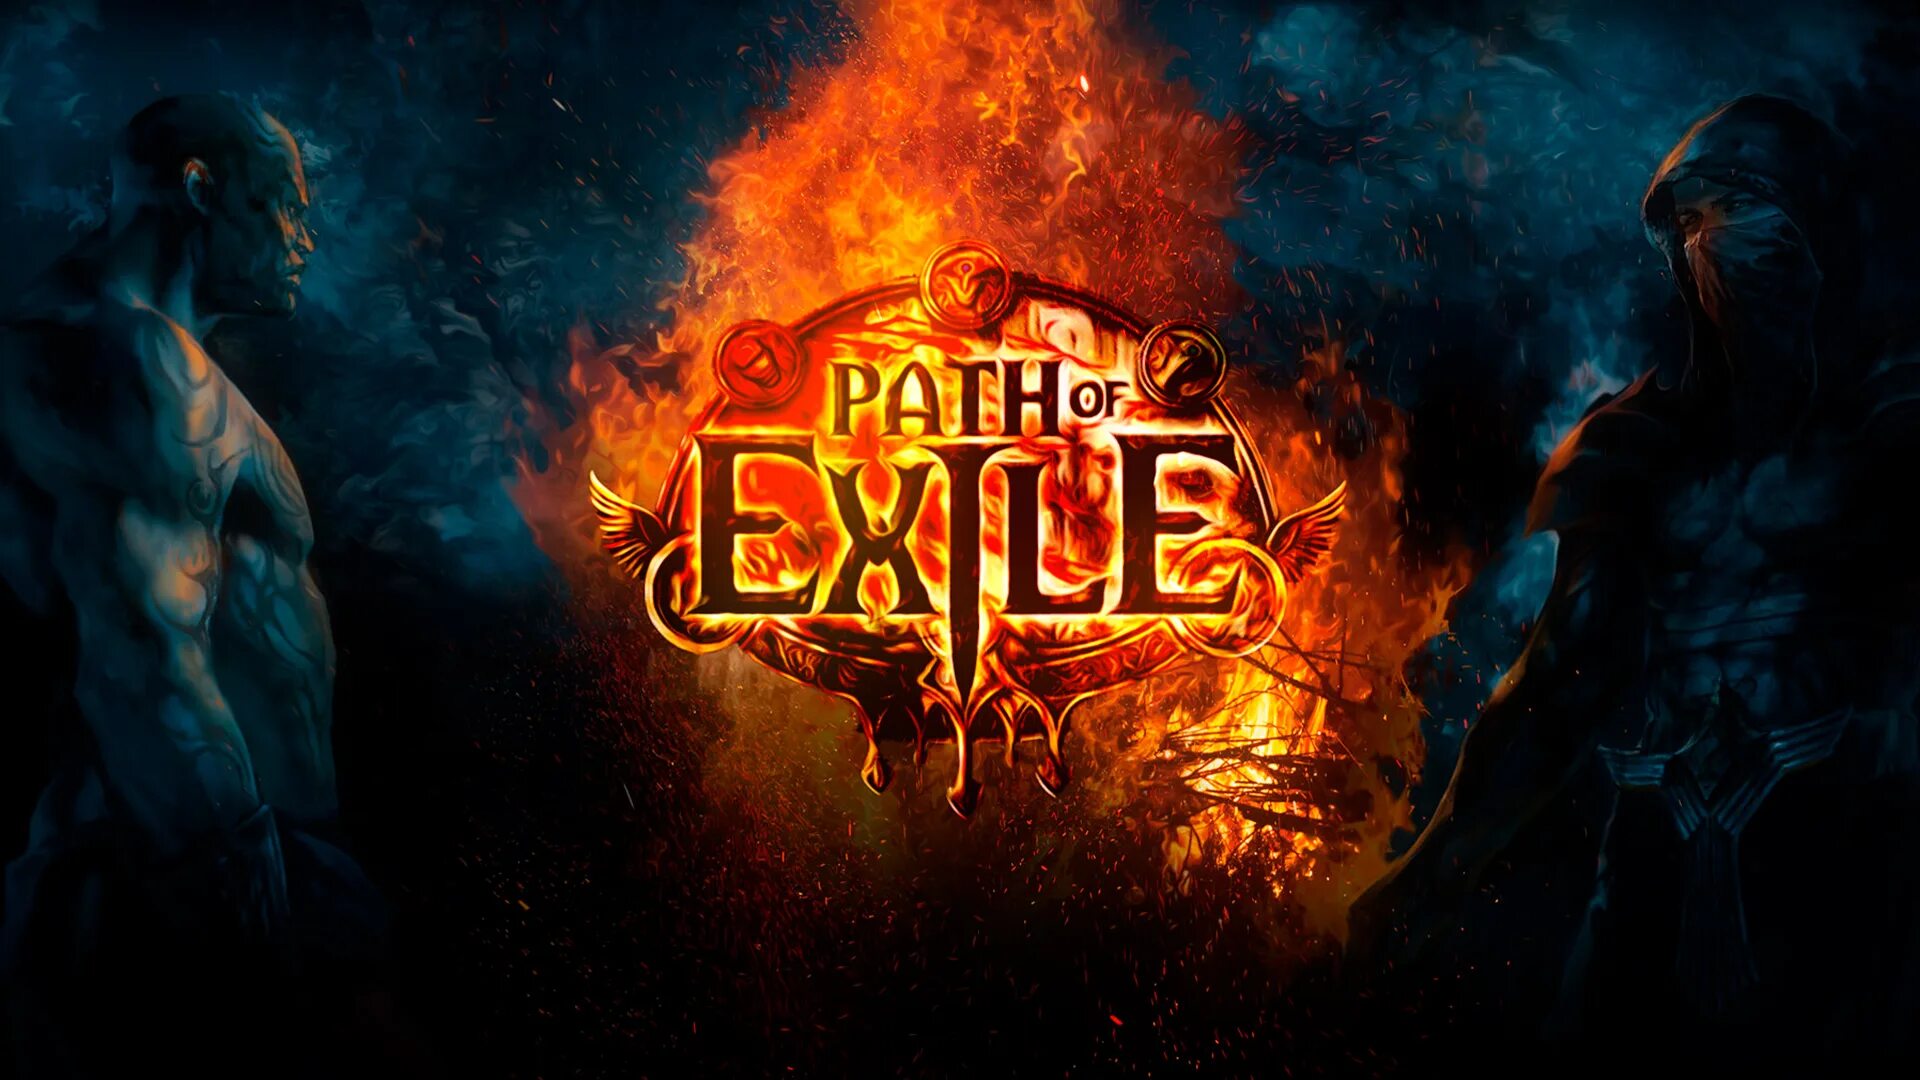 Poe дата выхода. Path of Exile 2. Path of Exile 1. Path of Exile 3. Логотип игры Path of Exile.